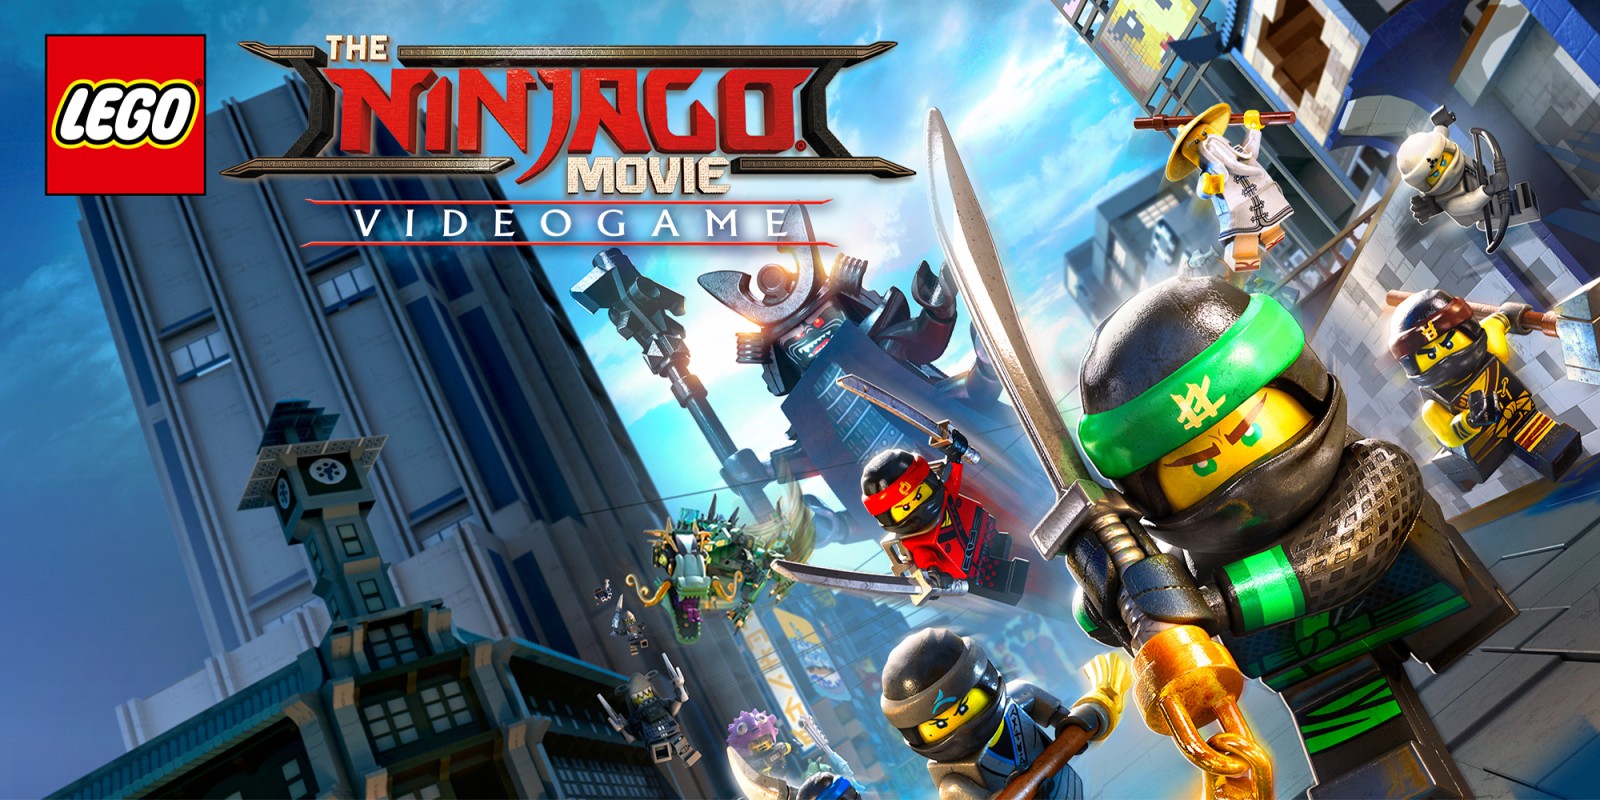 Wallpaper Lego, animated film, animated movie, The Lego Ninjago, Jay for  mobile and desktop, section фильмы, resolution 2764x1866 - download